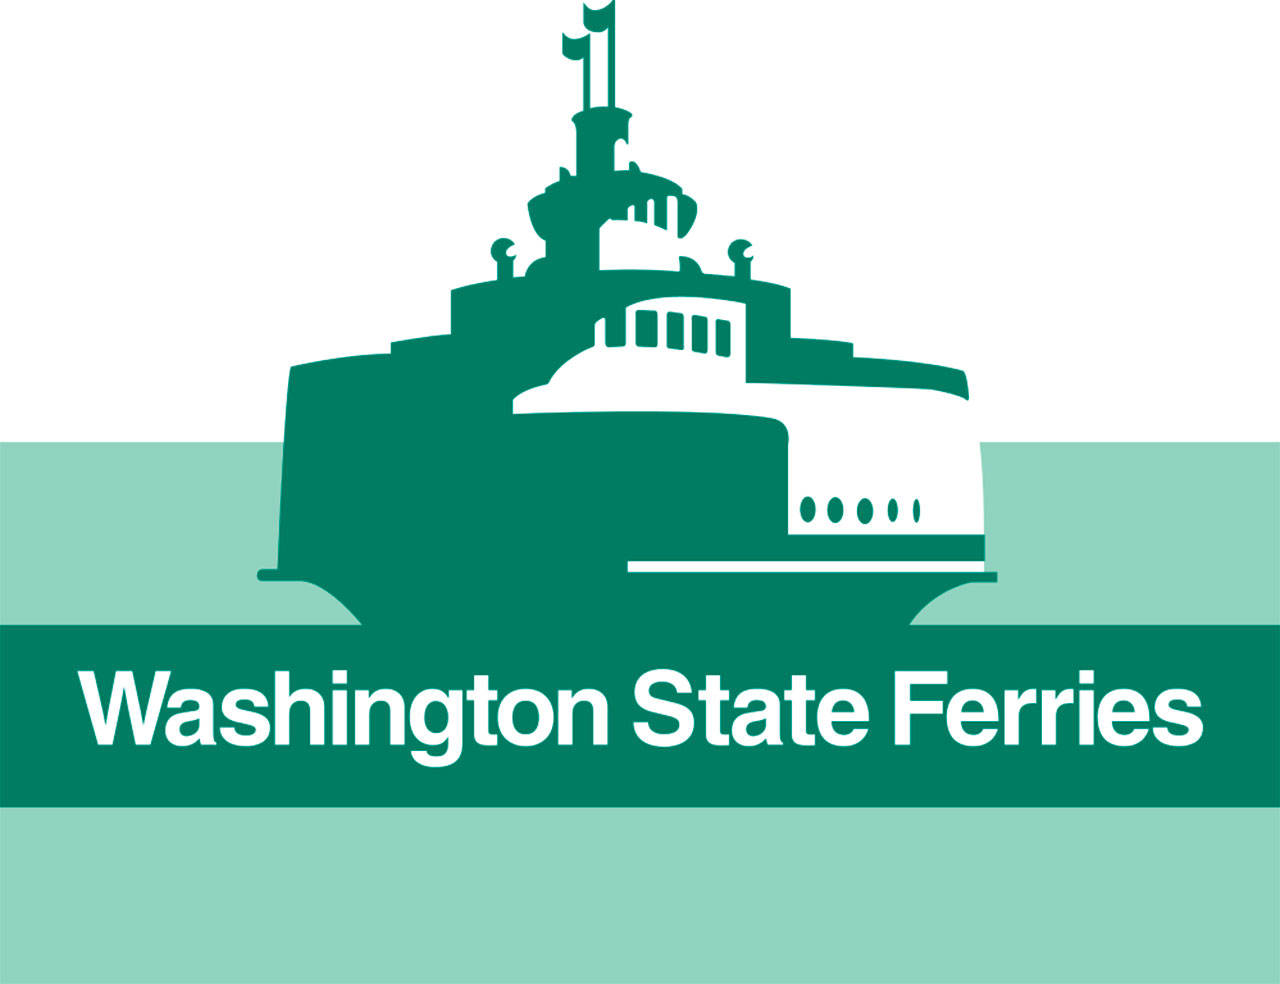 Expect traffic delays at Orcas ferry landing